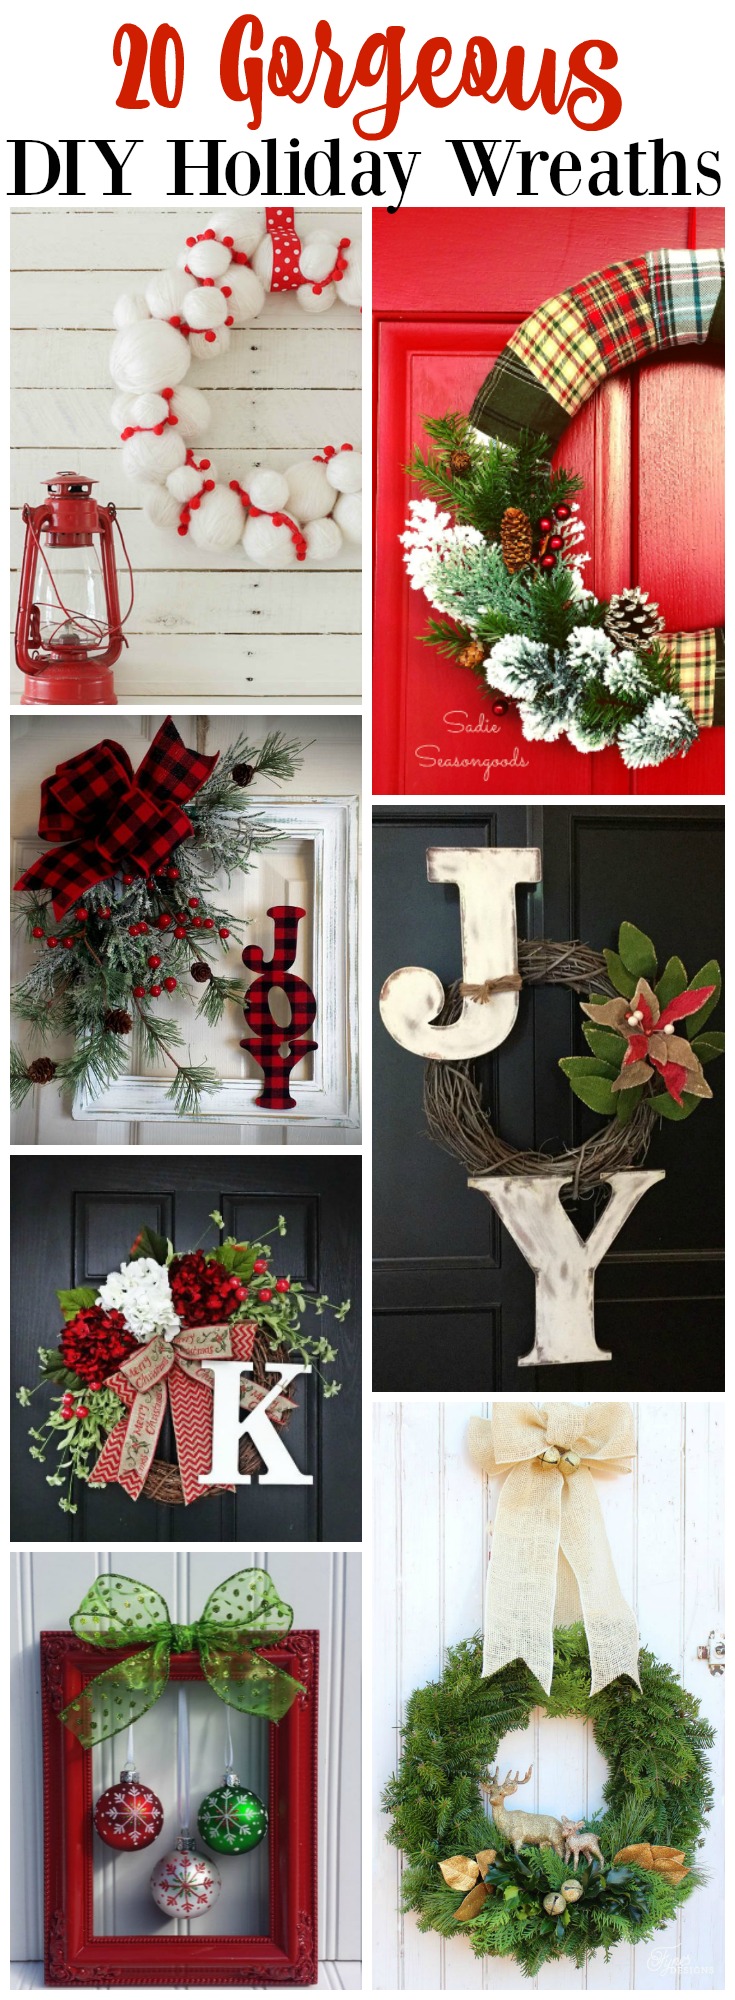 20 Gorgeous DIY Holiday Wreaths poster.